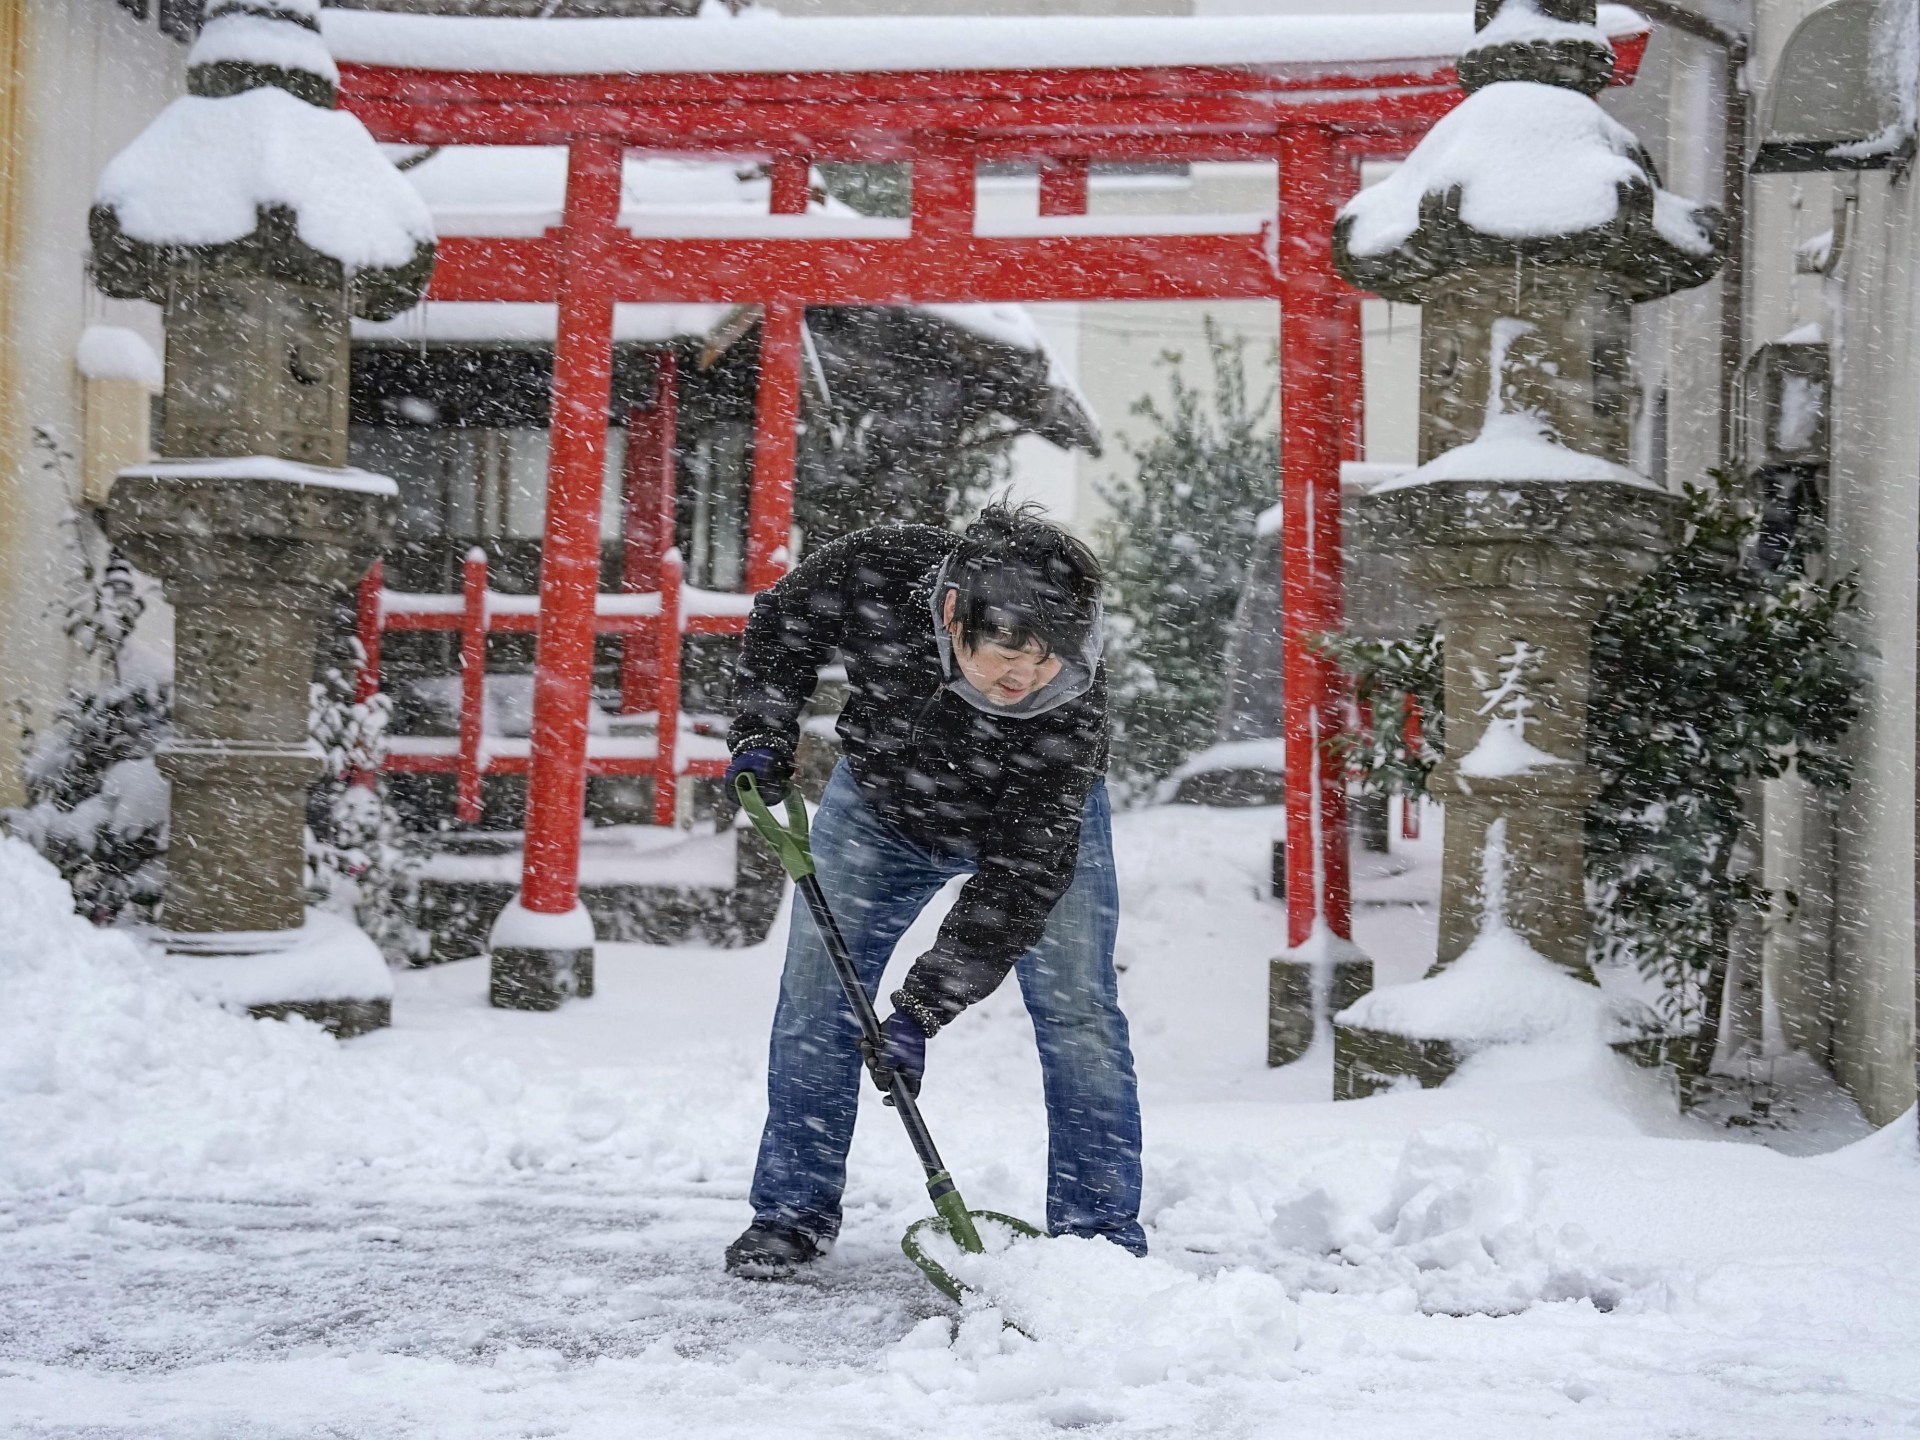 Northeast Asia battles severe cold snap and heavy snow